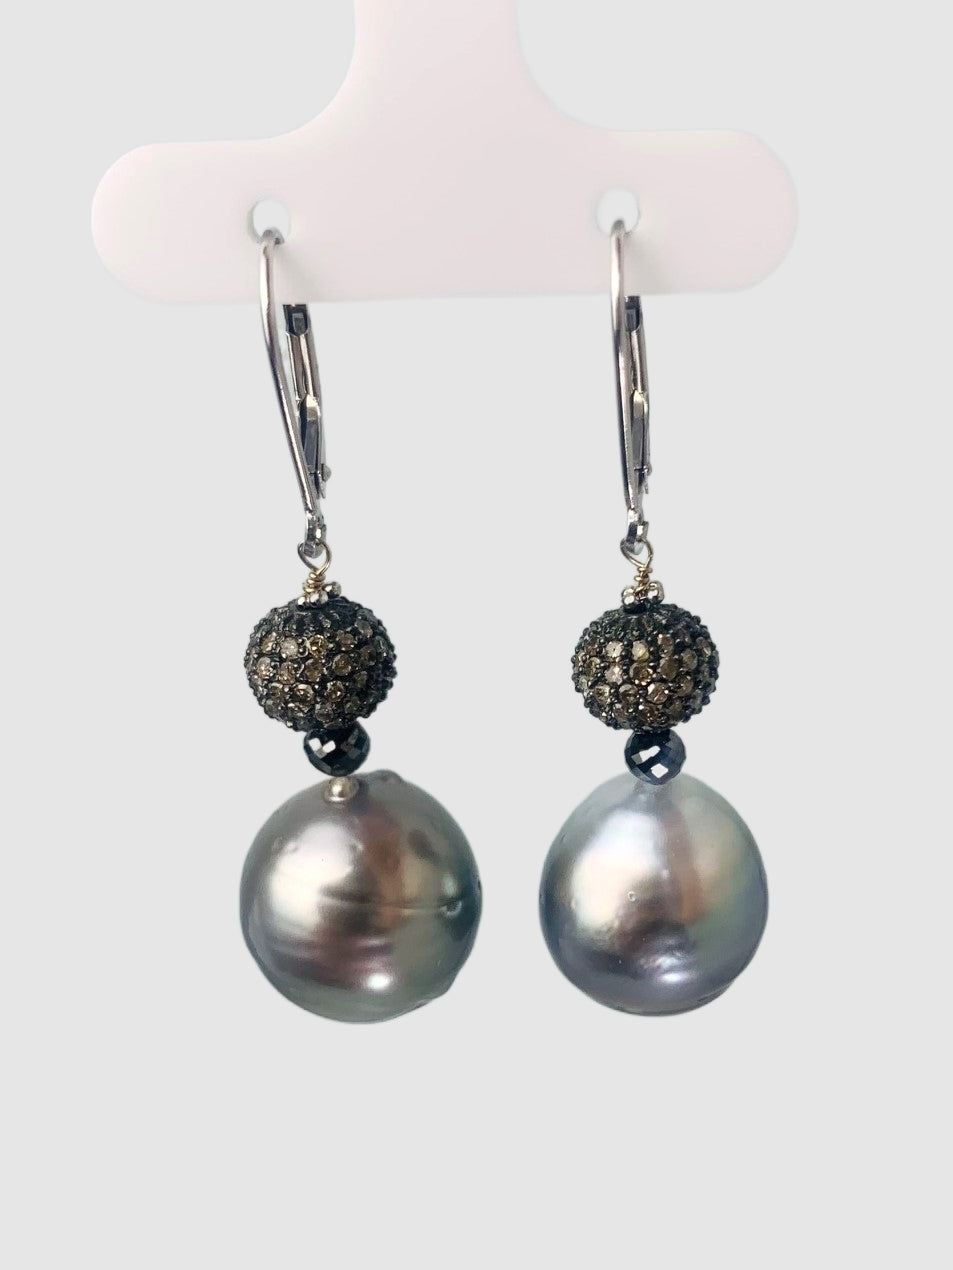 South Sea Pearl Drop Earrings With Antiqued Silver Pave Beads And Black Diamonds in 14KW, SS - EAR-125-DCOPRLDIA14WSS-GRYBK